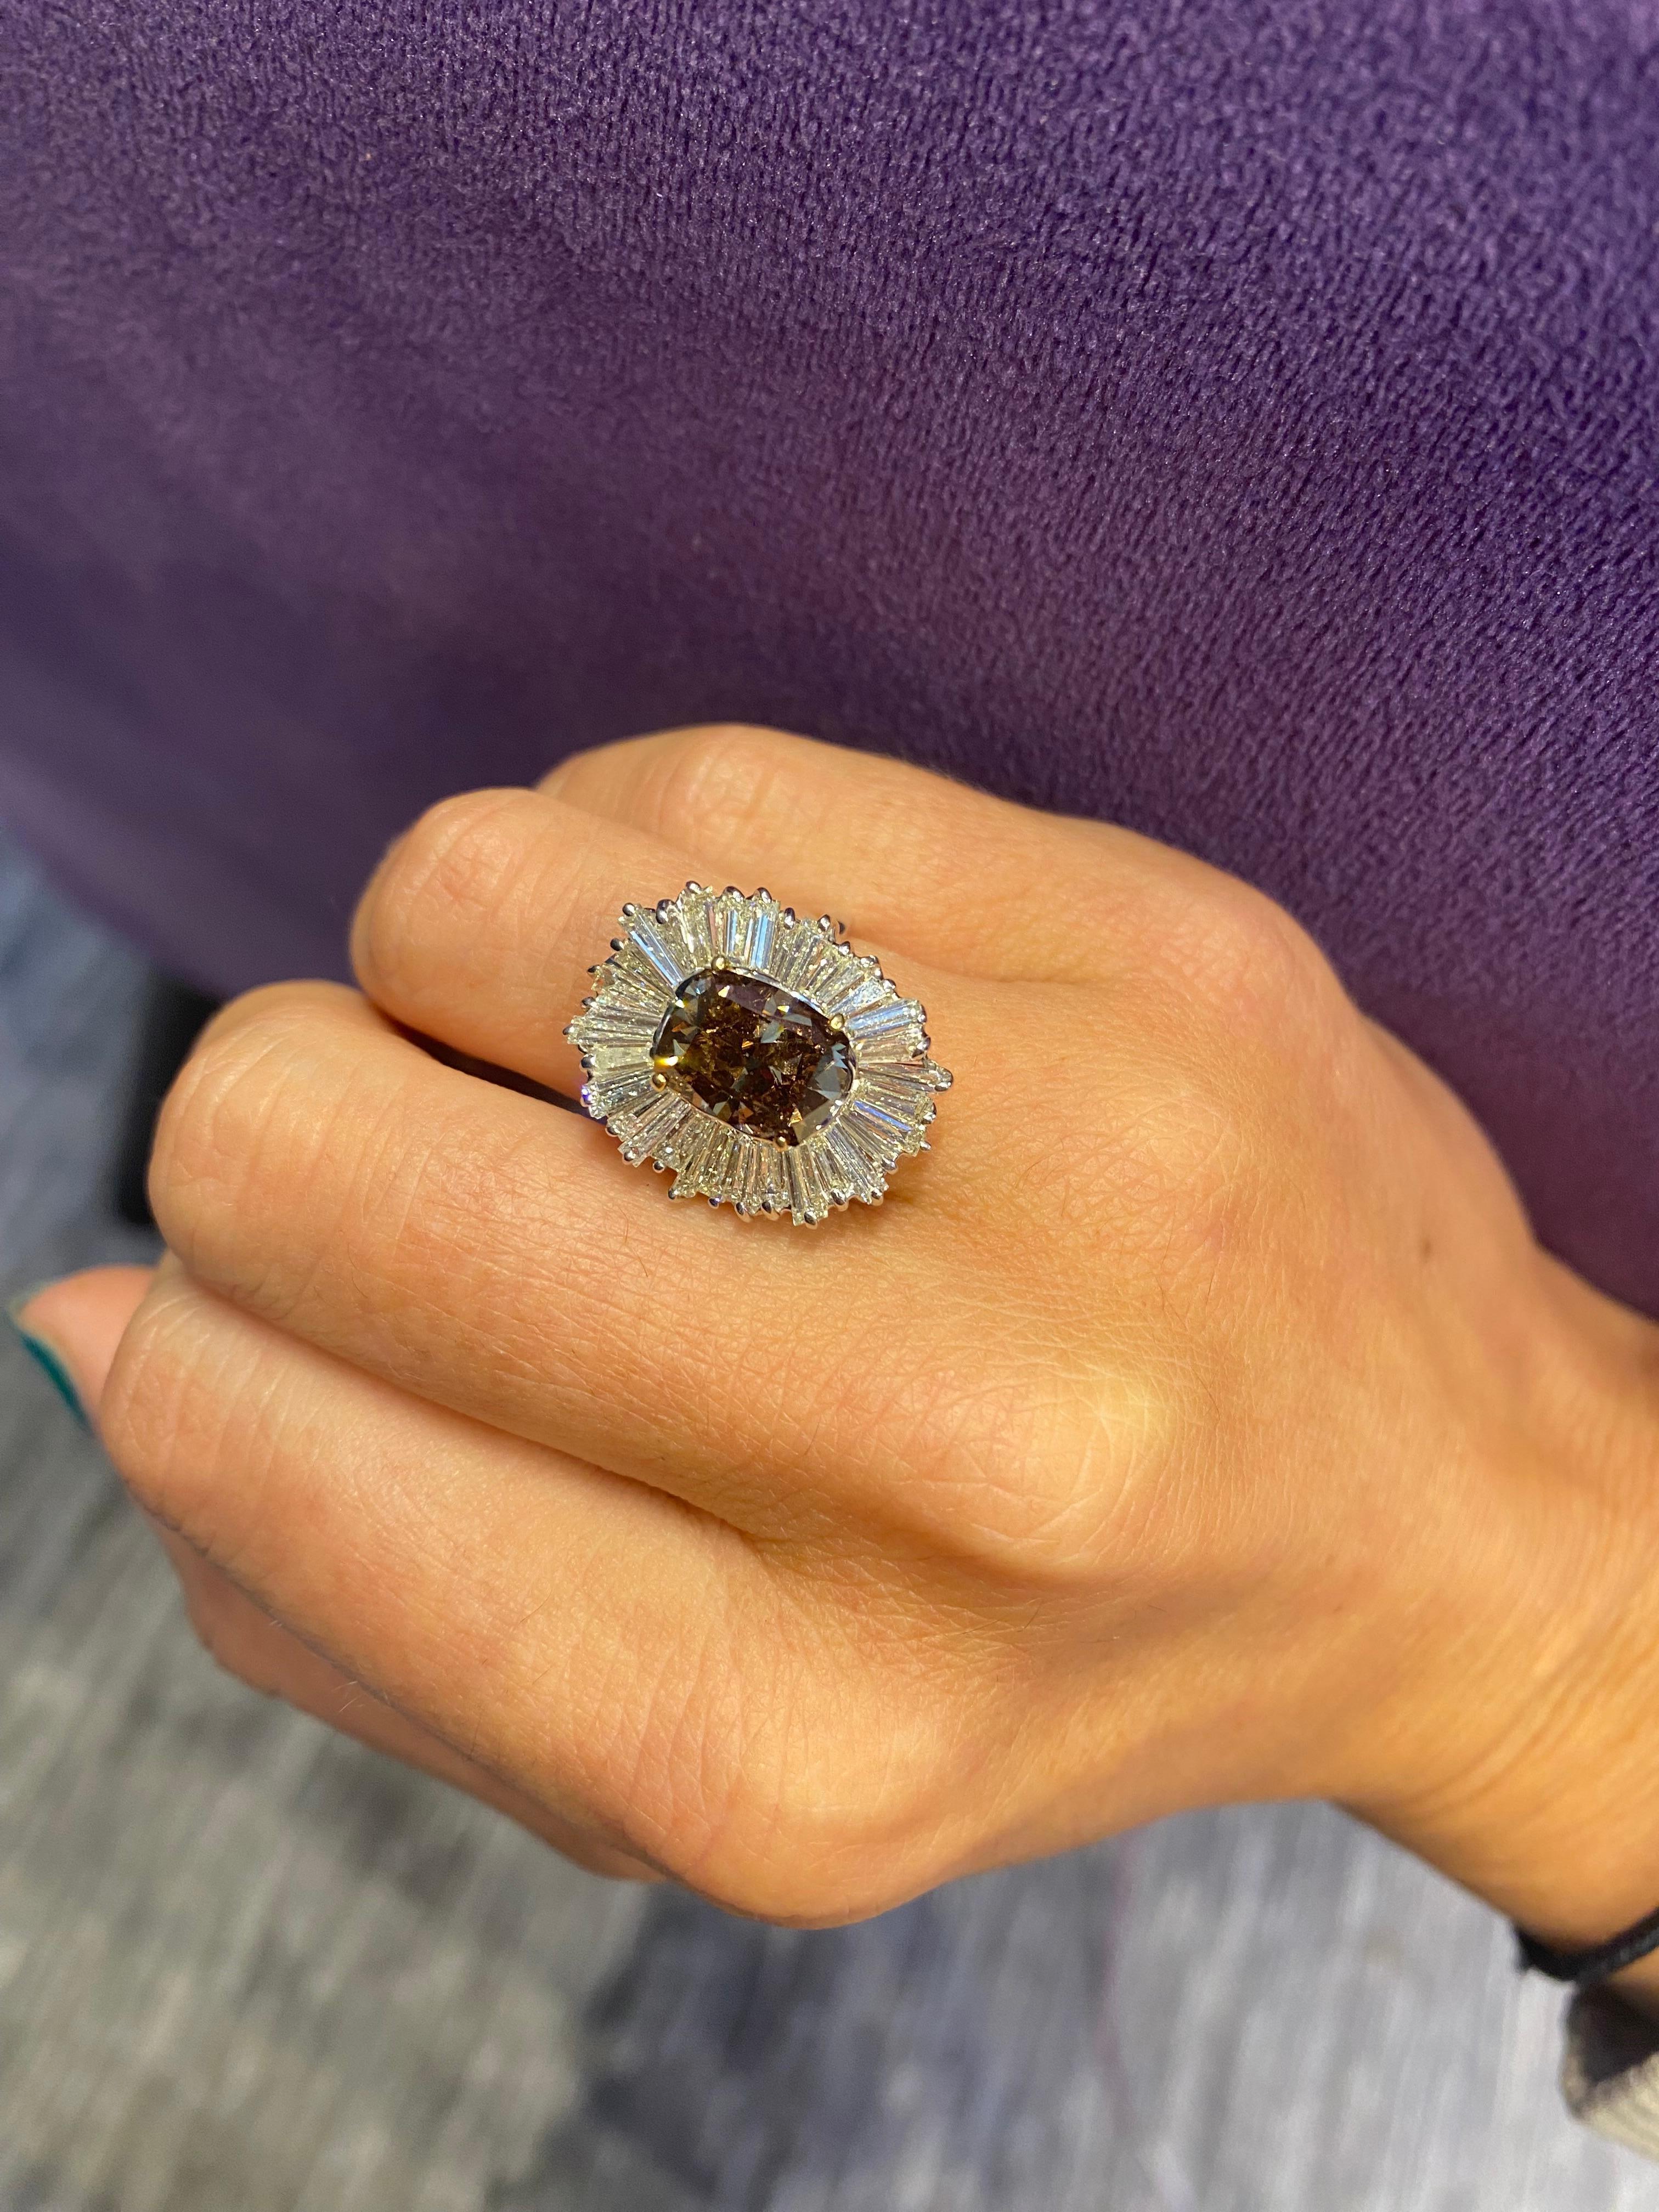 Oval Cushion Cut Brown Diamond Ballerina Ring

A white gold ring set with a center oval cushion cut light brown diamond, weighing approximately 3.37 carats, framed by 32 baguette cut diamonds weighing approximately 2.66 carats

Ring Size: 5.75
14